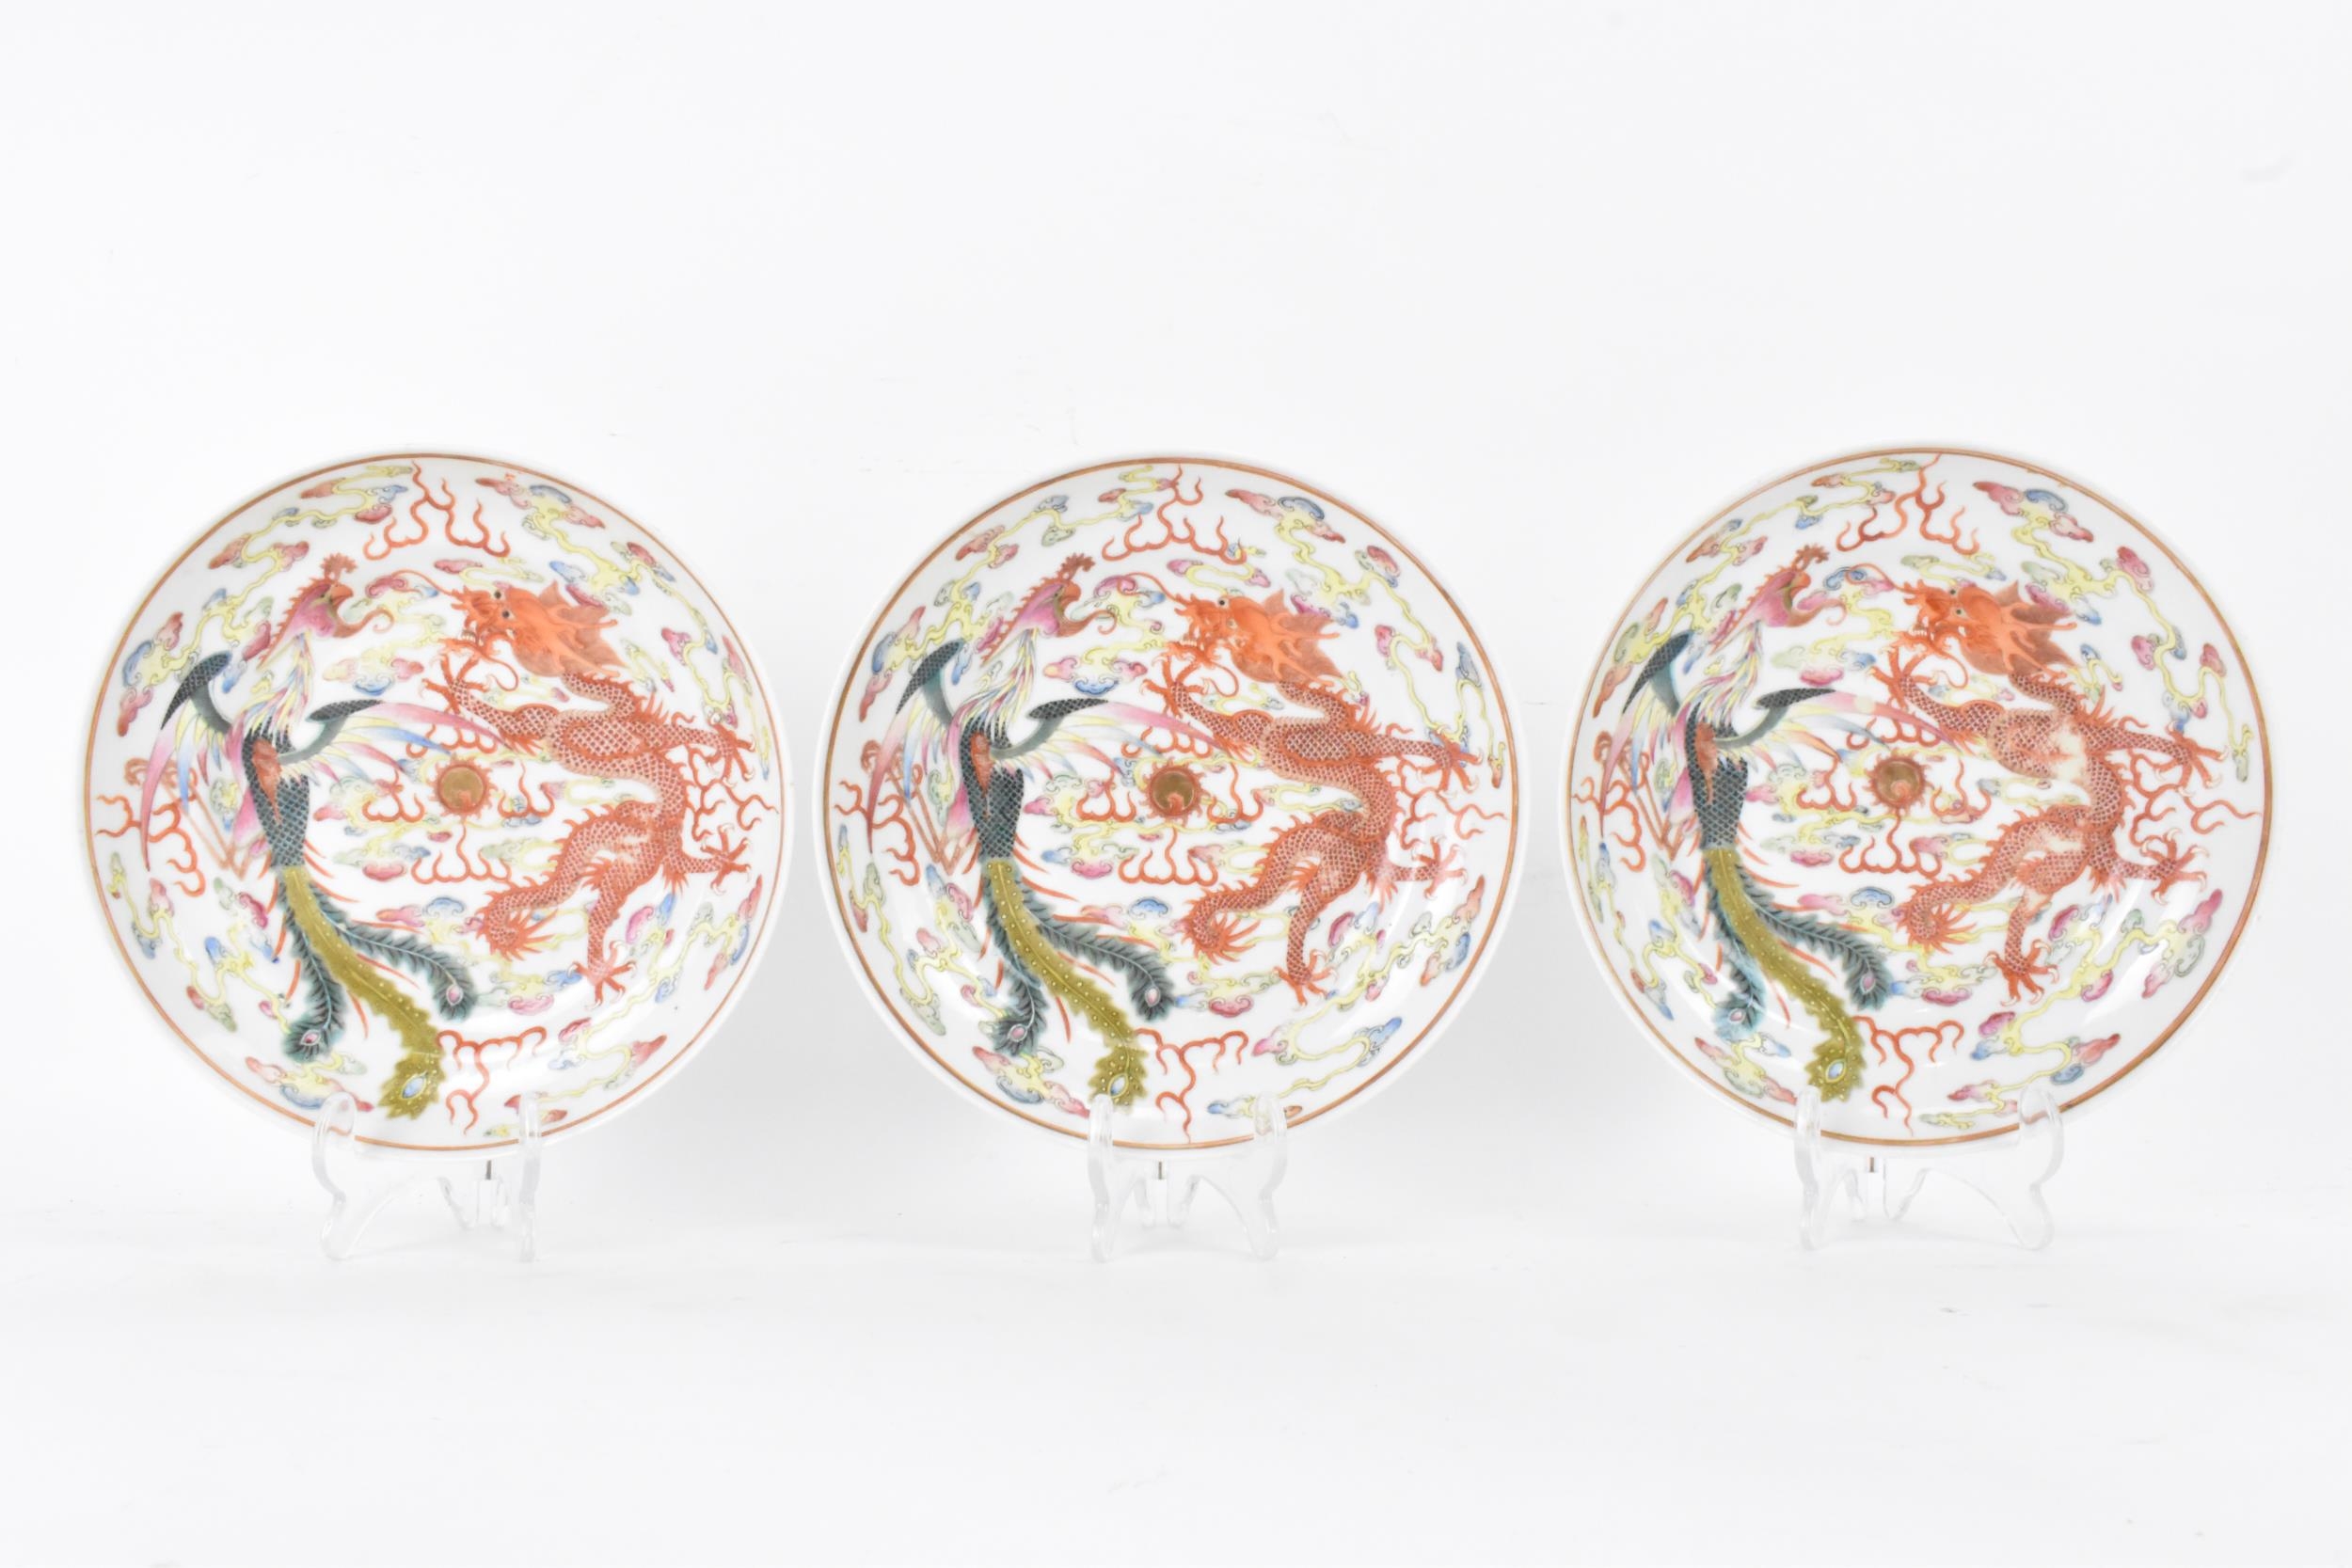 A set of three Chinese Xuantong period famille rose bowls, decorated in polychrome enamels with a